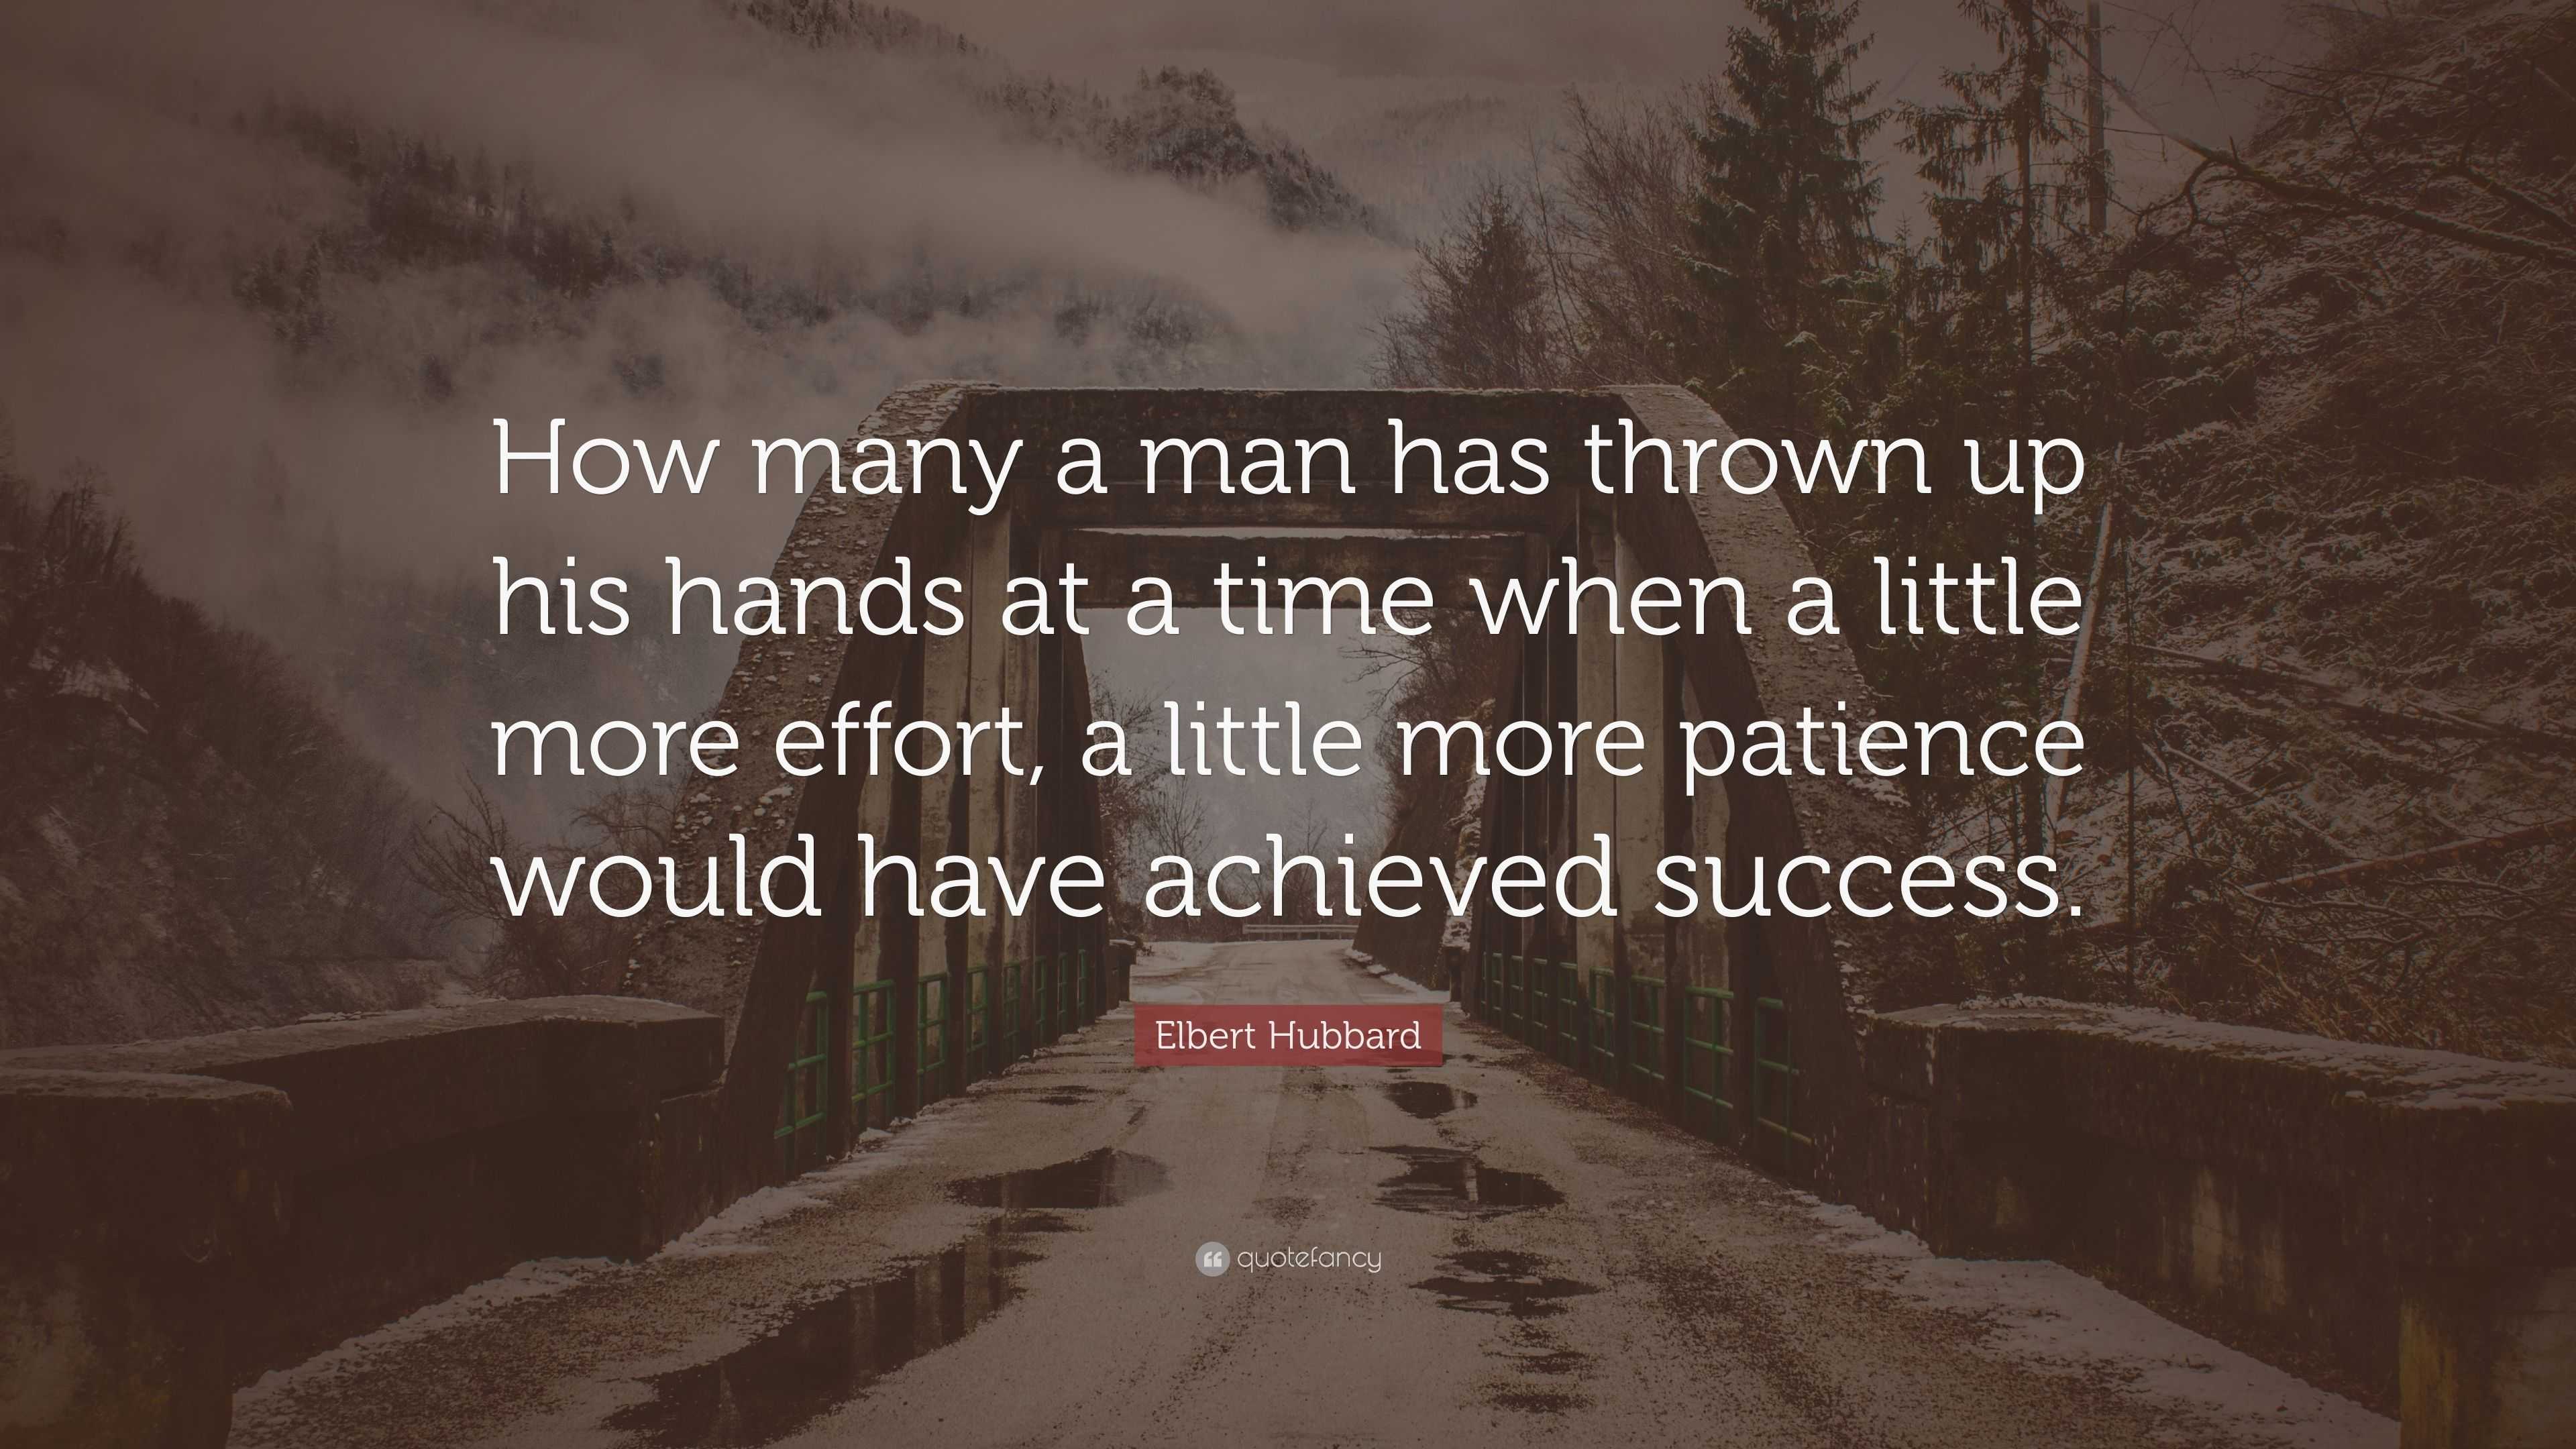 Elbert Hubbard Quote: “How many a man has thrown up his hands at a time ...